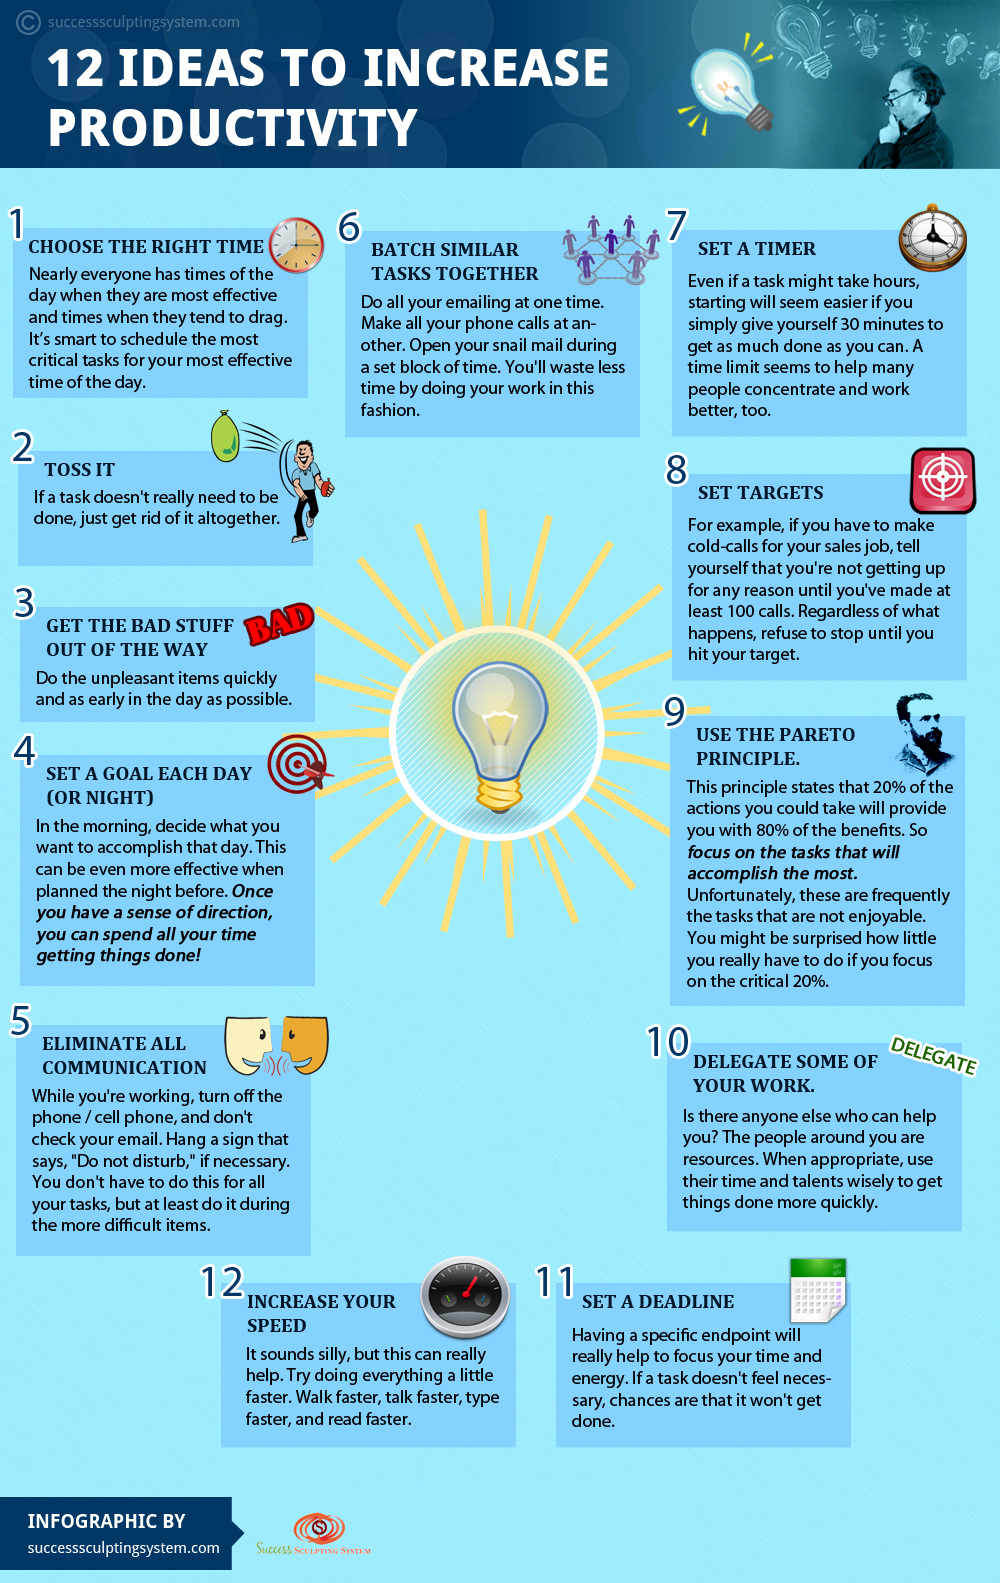 12 Ideas to Increase Productivity